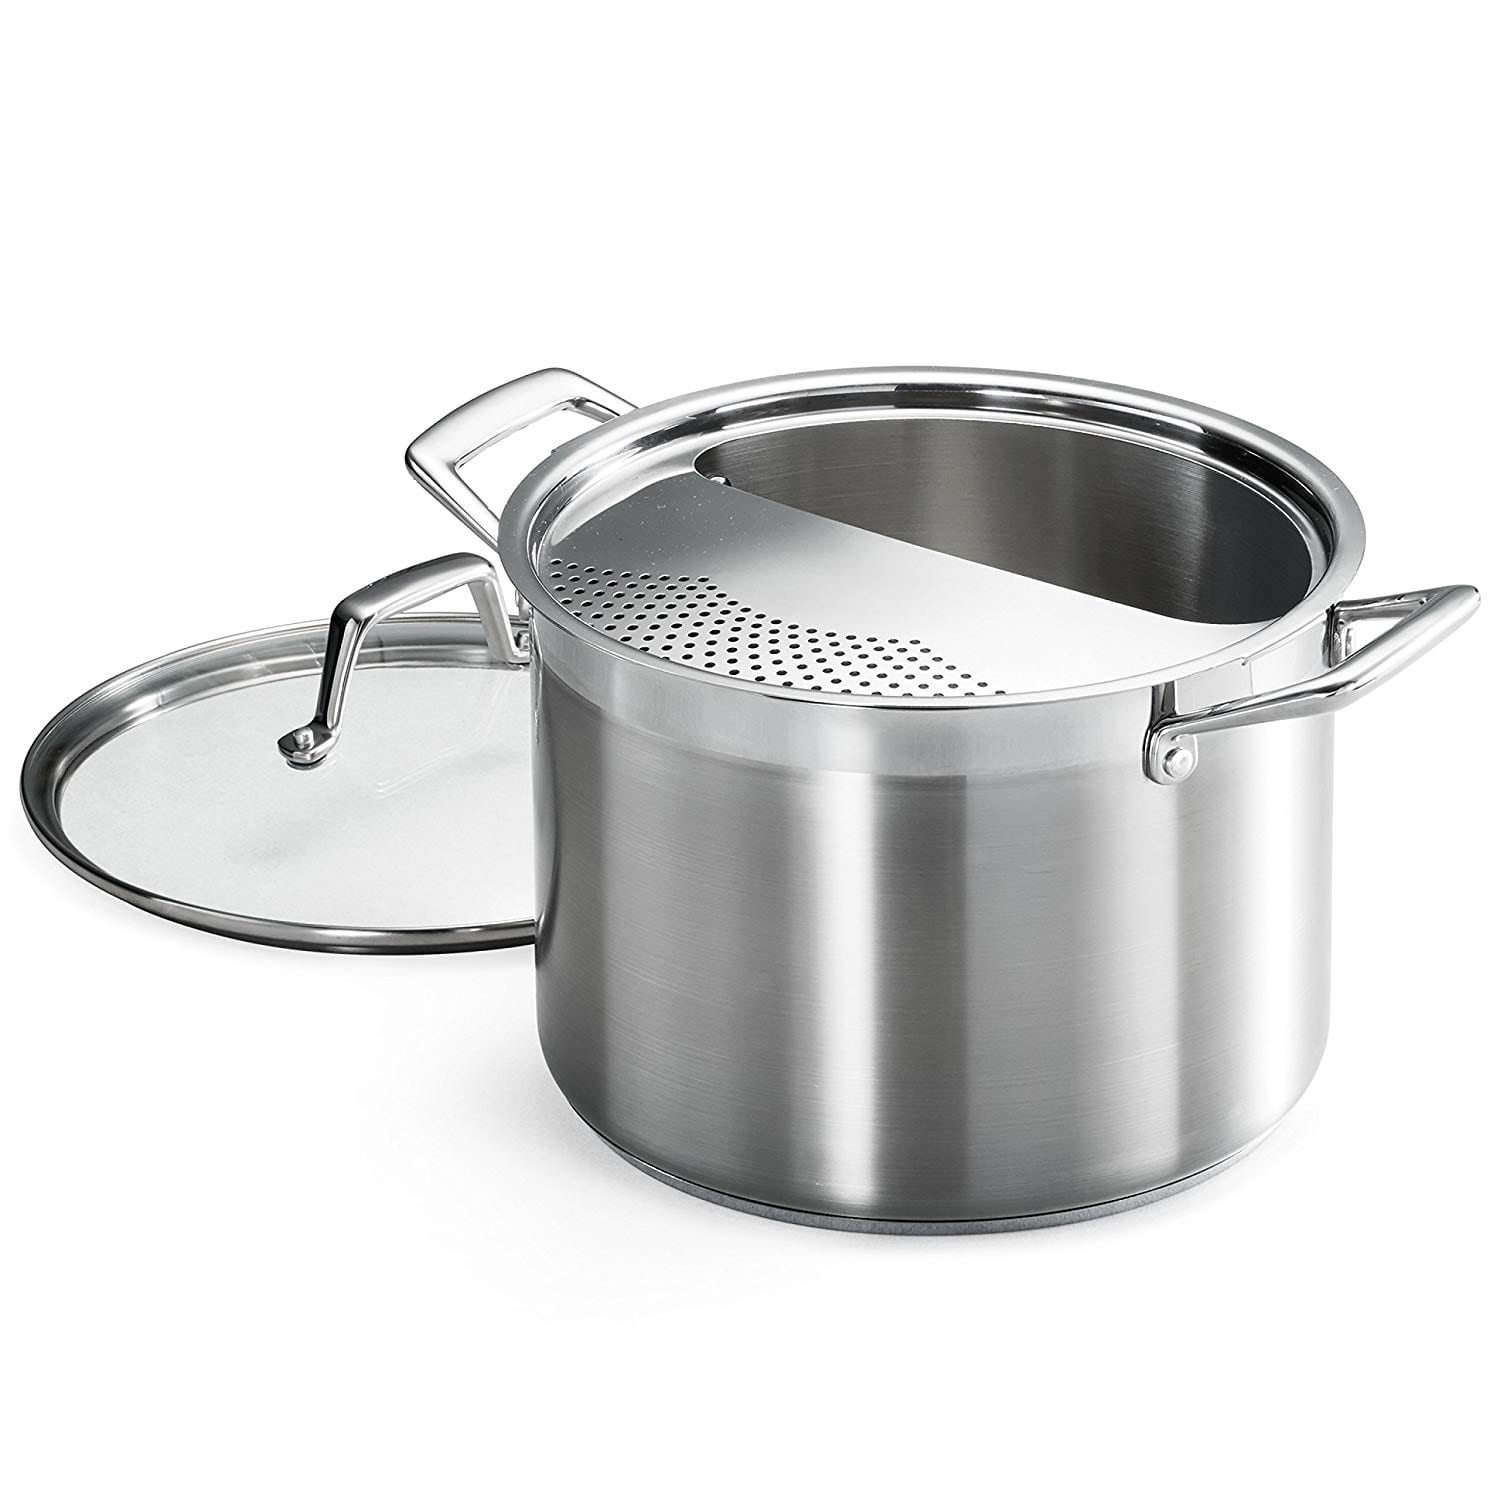 9 Best Pasta Pots with Strainer Reviews - Cooking Top Gear